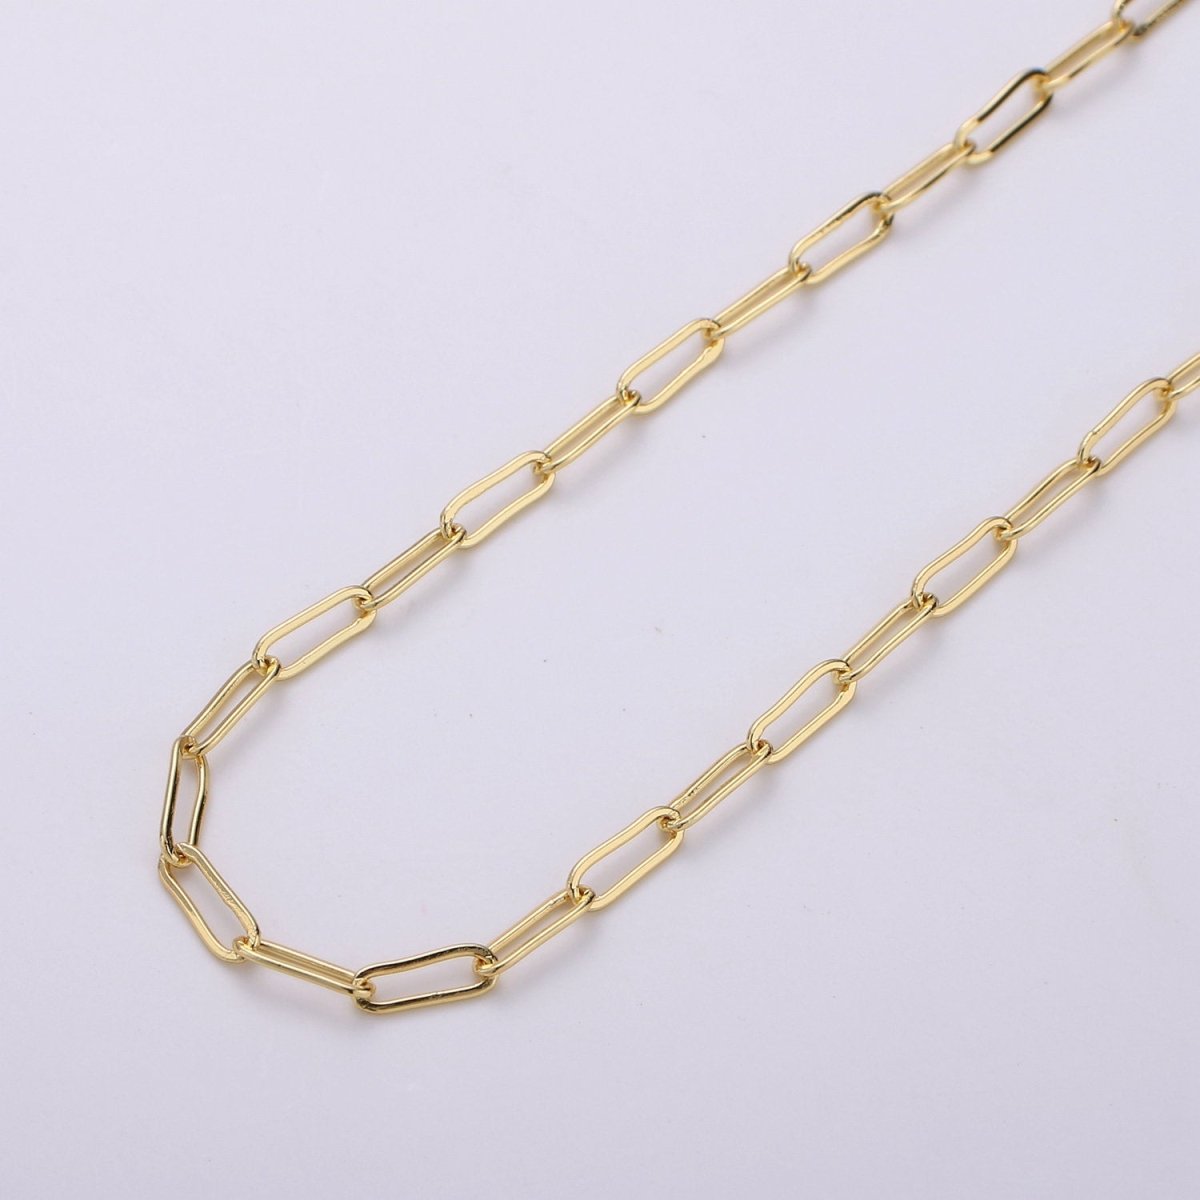 24K Gold Filled PAPERCLIP Chain, Elongated Rectangular Link Chain Paper Clip Chain Sold by the Yard Unfinished Chain 9x2.5mm | ROLL-125 ROLL-126 ROLL-005 Clearance Pricing - DLUXCA